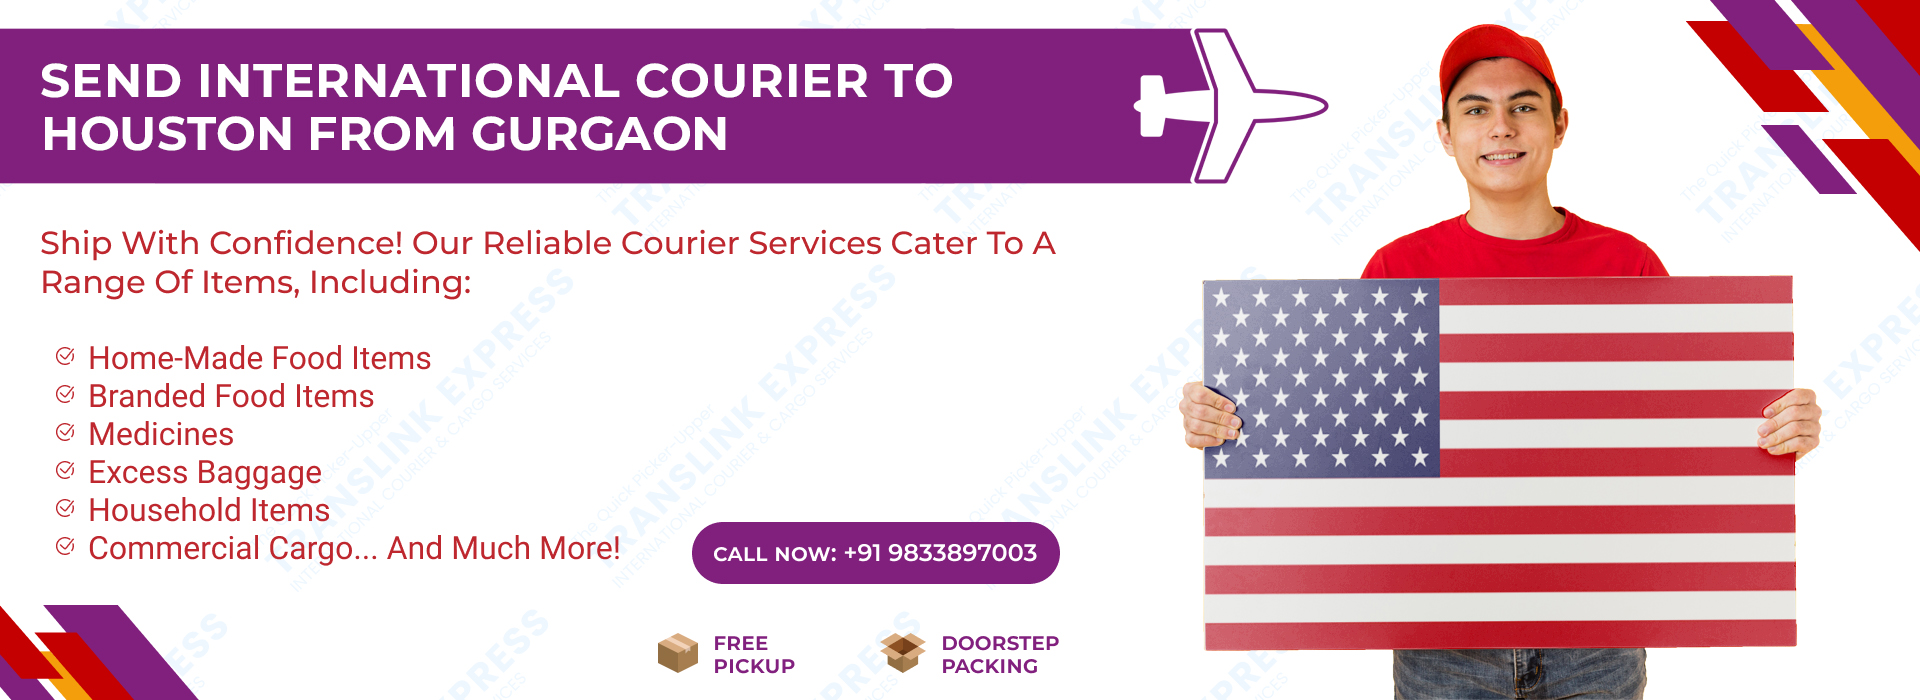 Courier to Houston From Gurgaon